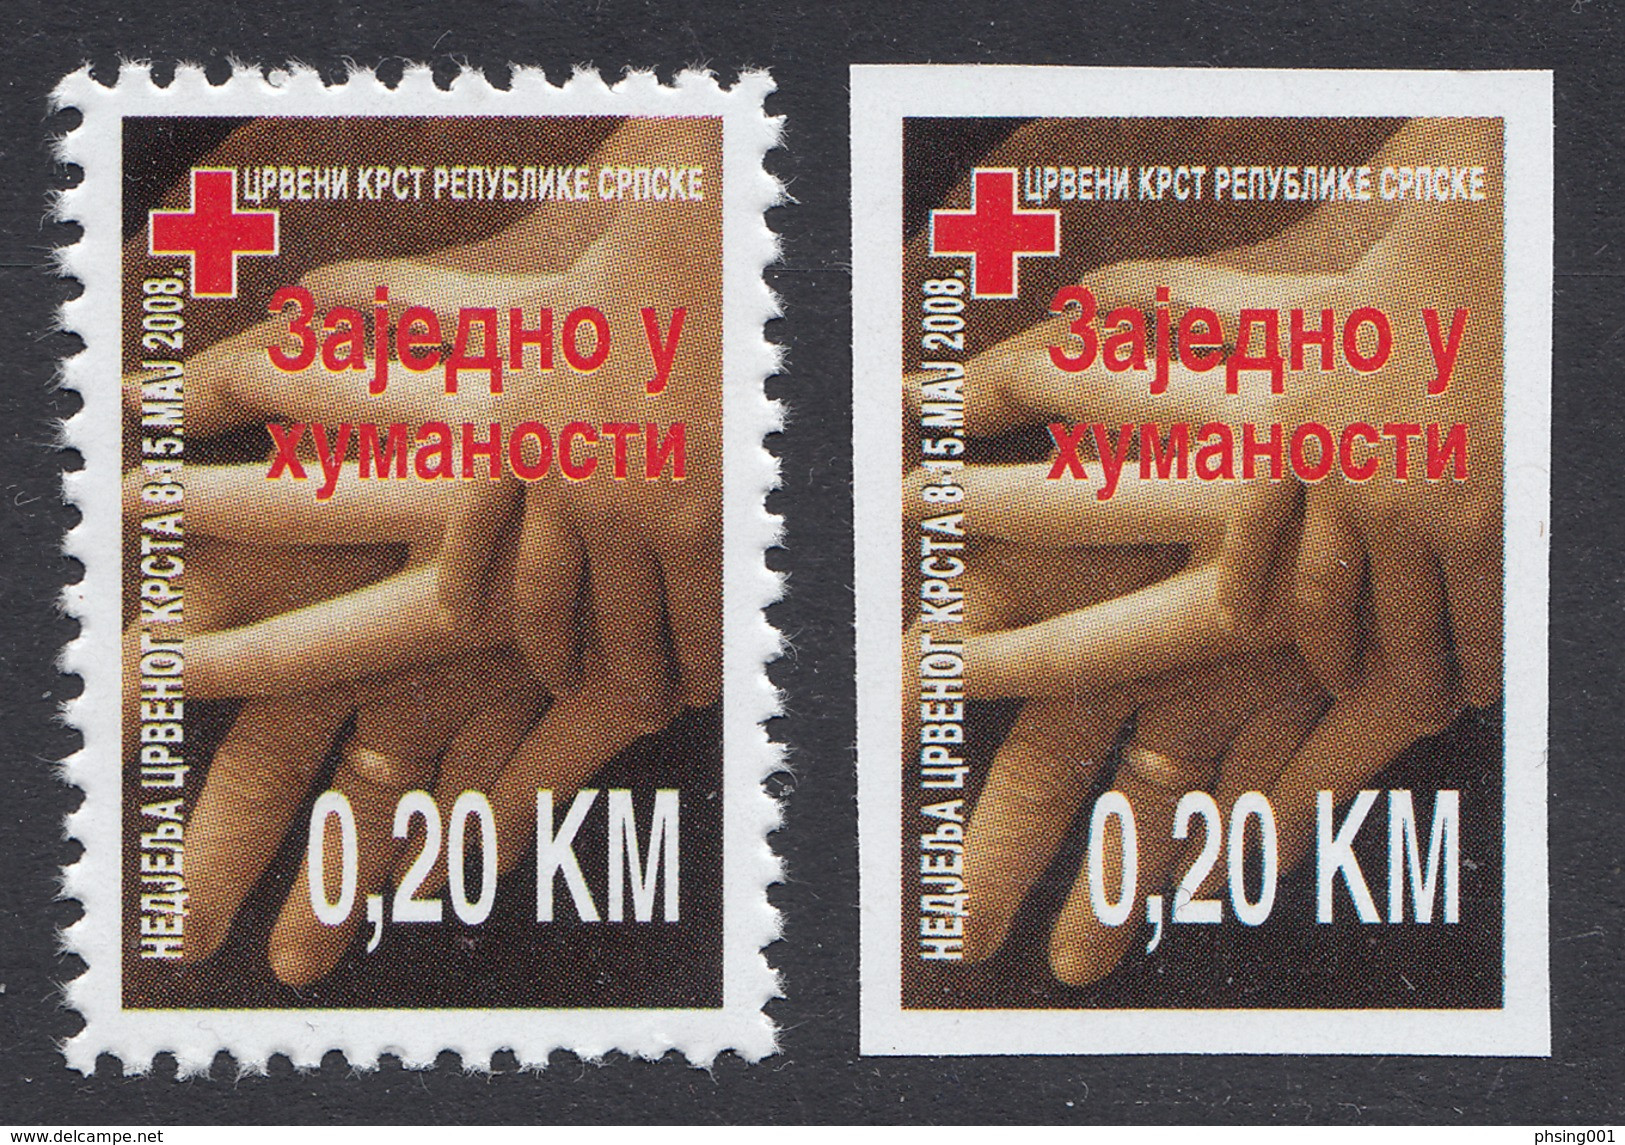 Bosnia Serbia 2008 Red Cross Rotes Kreuz Croix Rouge, Tax Charity Surcharge, Perforated + Imperforated Stamp MNH - Croce Rossa